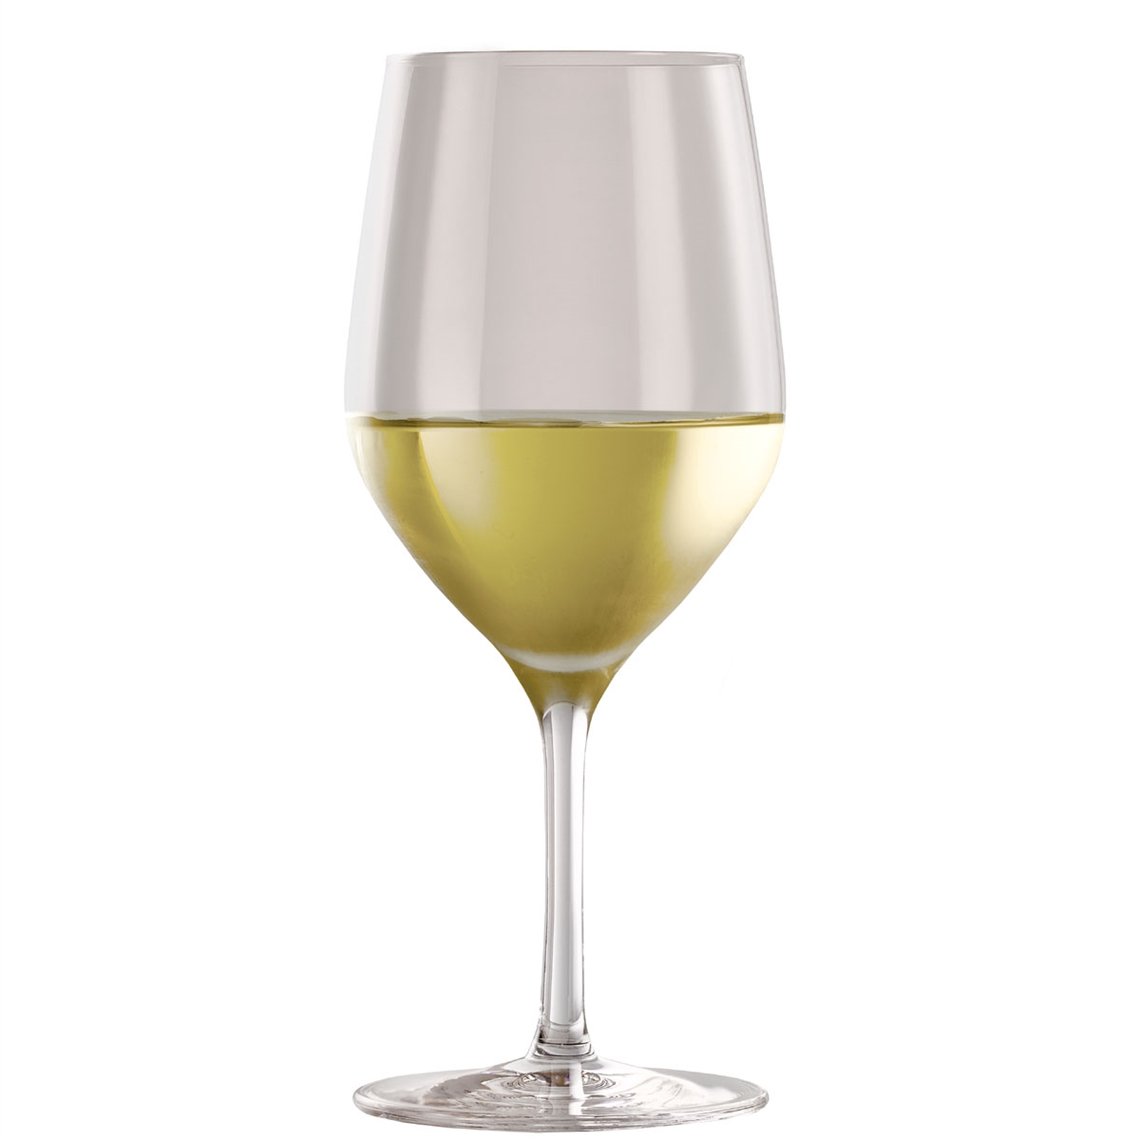 Stolzle Olly Smith Charm Collection White Wine Glass - Set of 4